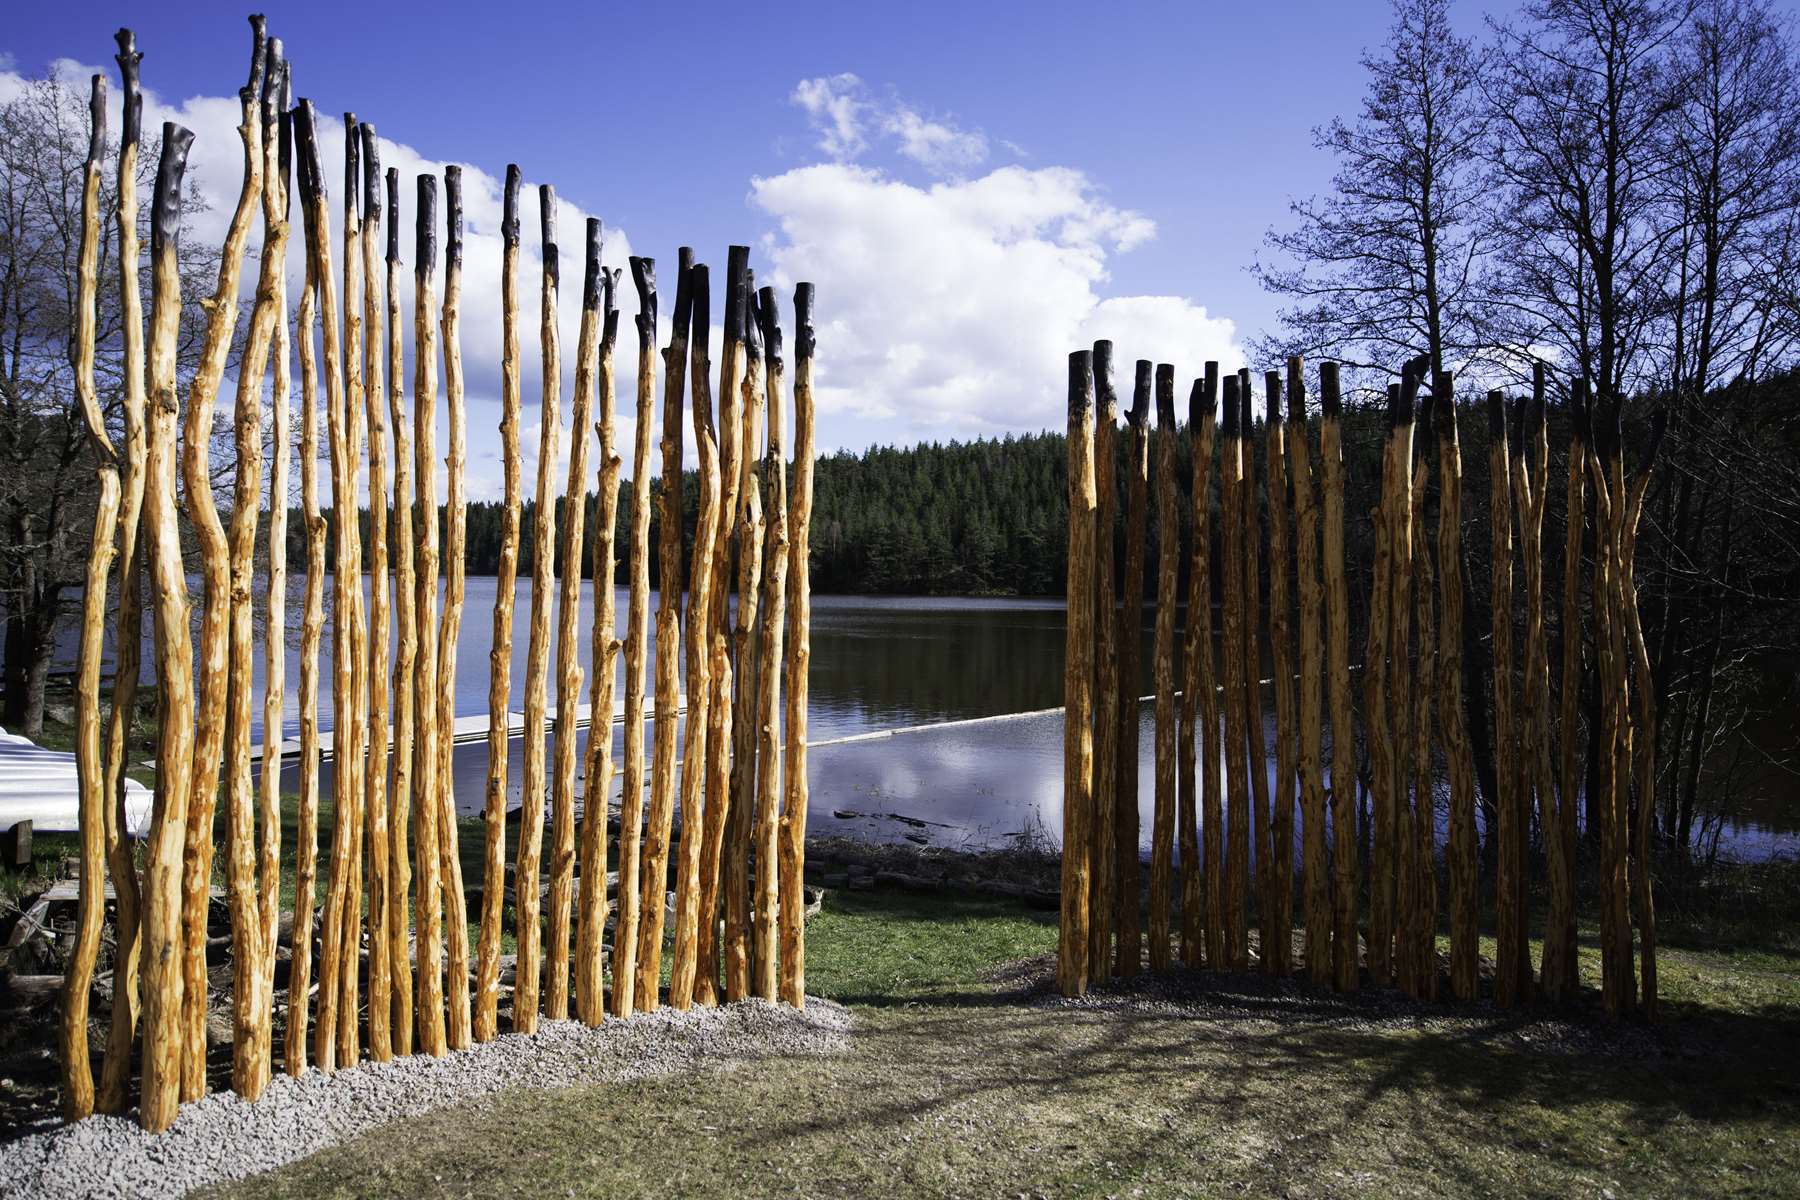 WRAFTING STORIES, Protected area, Sweden, 2017. Installation by Karl Chilcott.